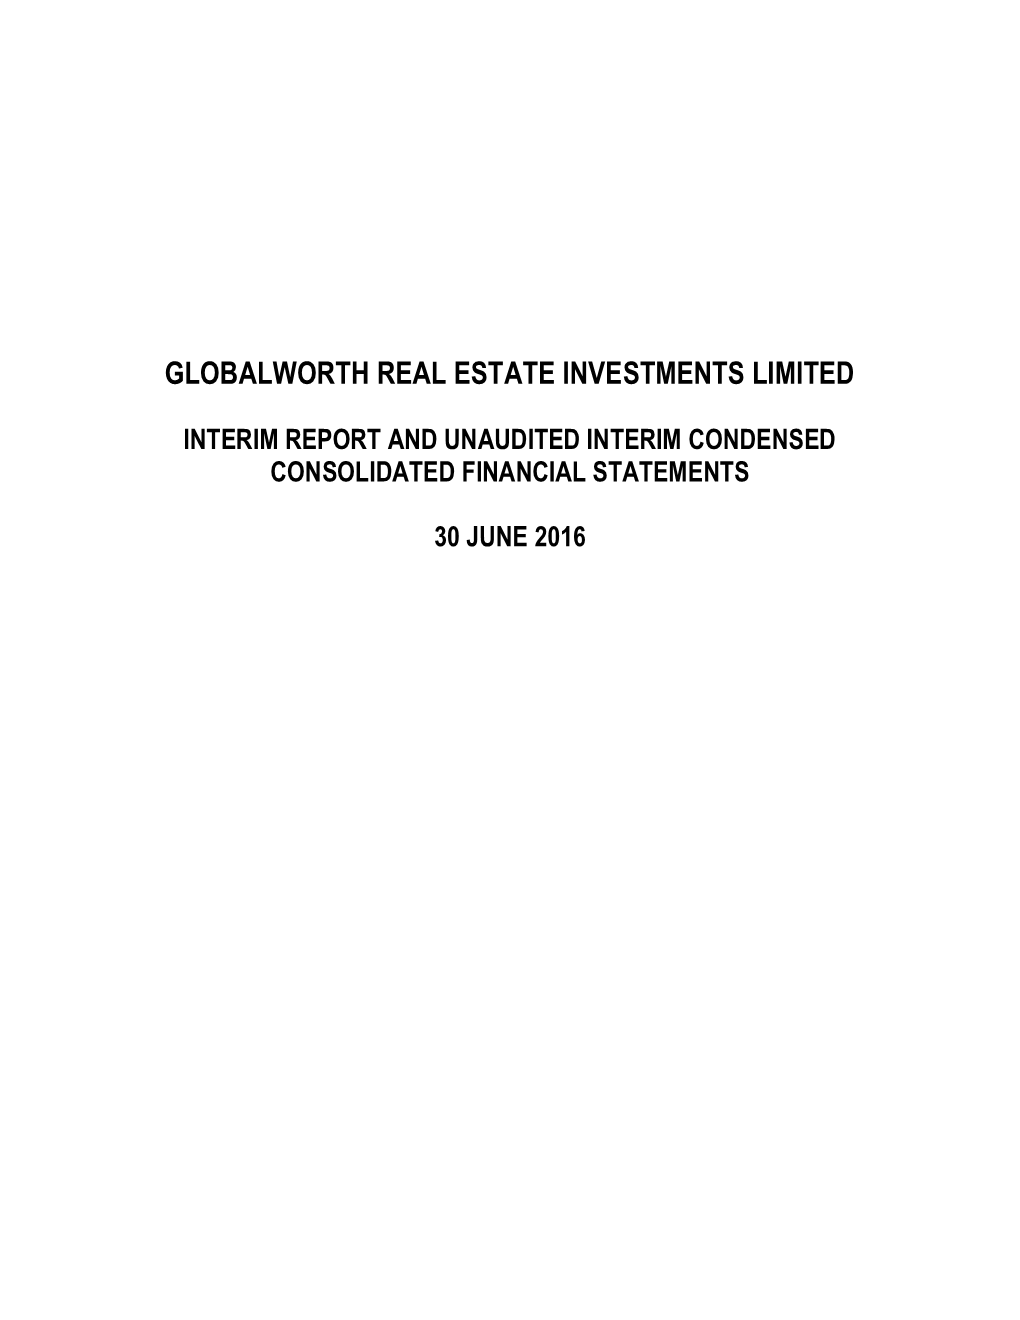 Globalworth Real Estate Investments Limited